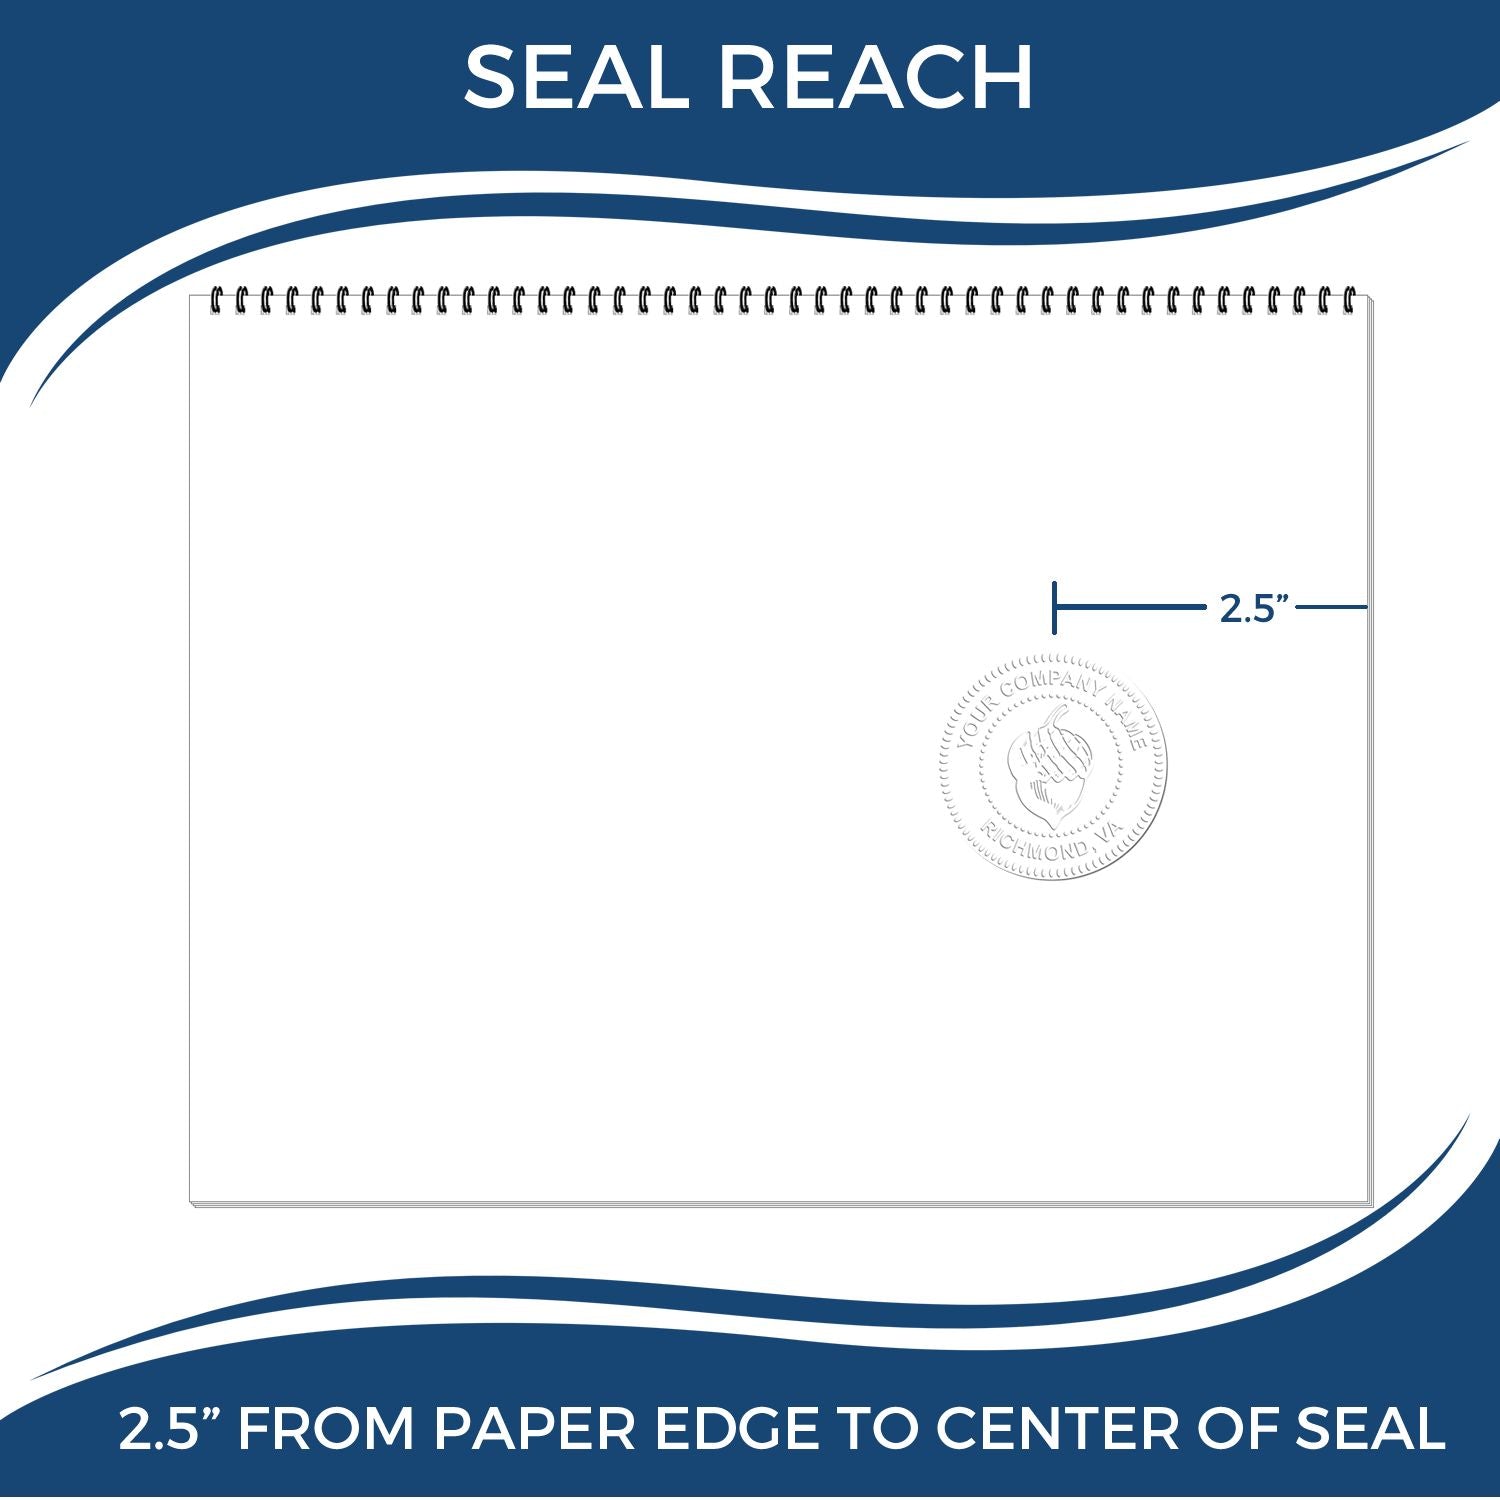 An infographic showing the seal reach which is represented by a ruler and a miniature seal image of the Long Reach Idaho Land Surveyor Seal